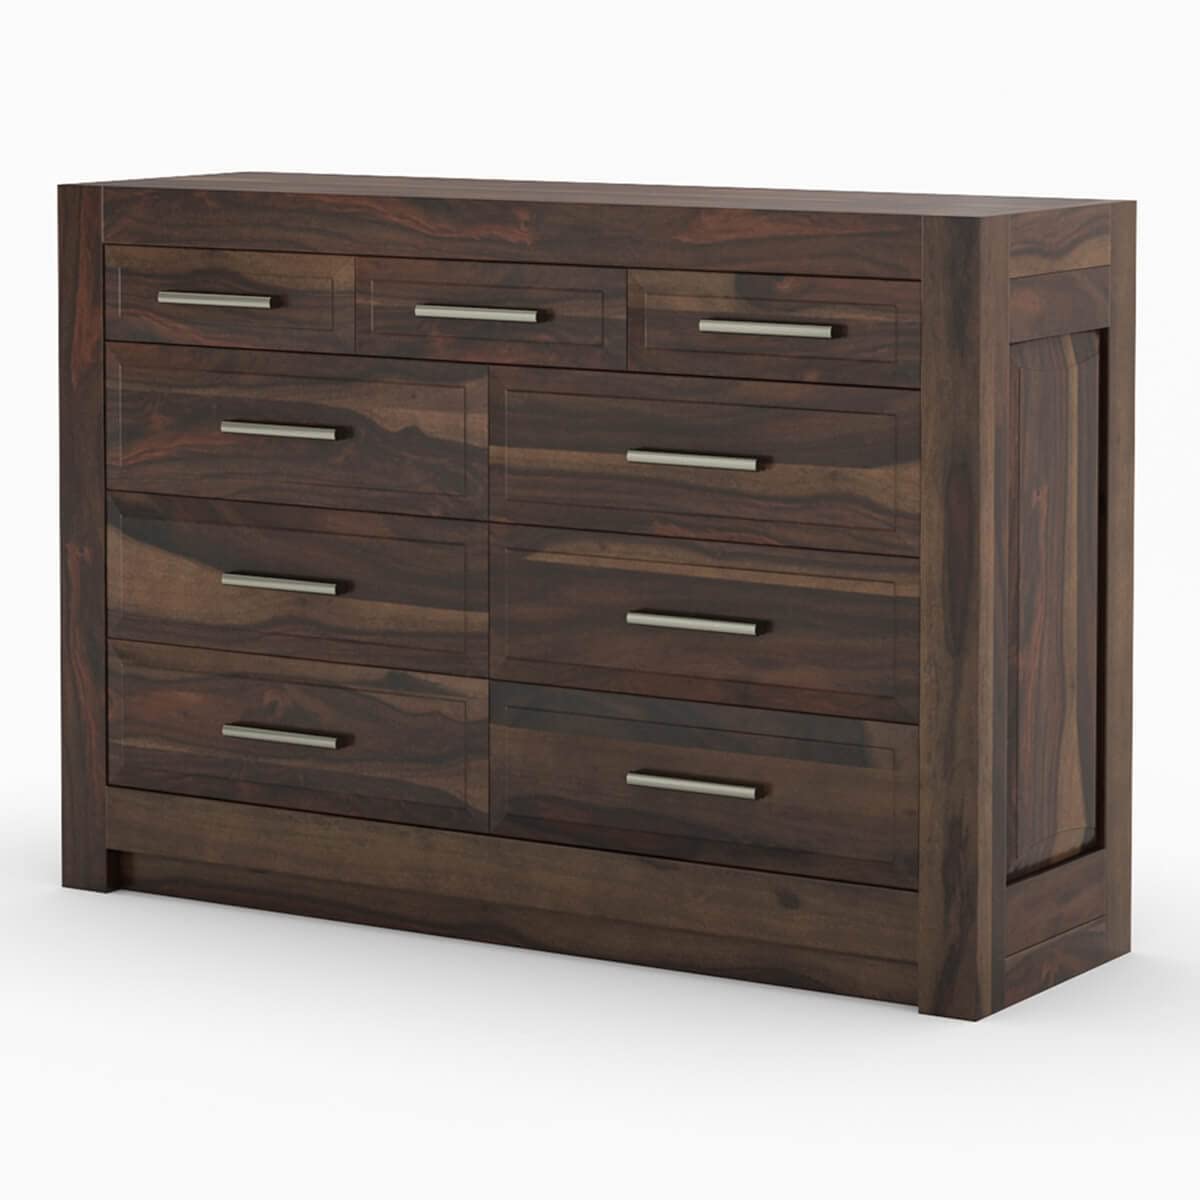 WoodMarwar Solid Sheesham Wood Chest of Drawer 10 Drawers Dresser for Home & Living Room